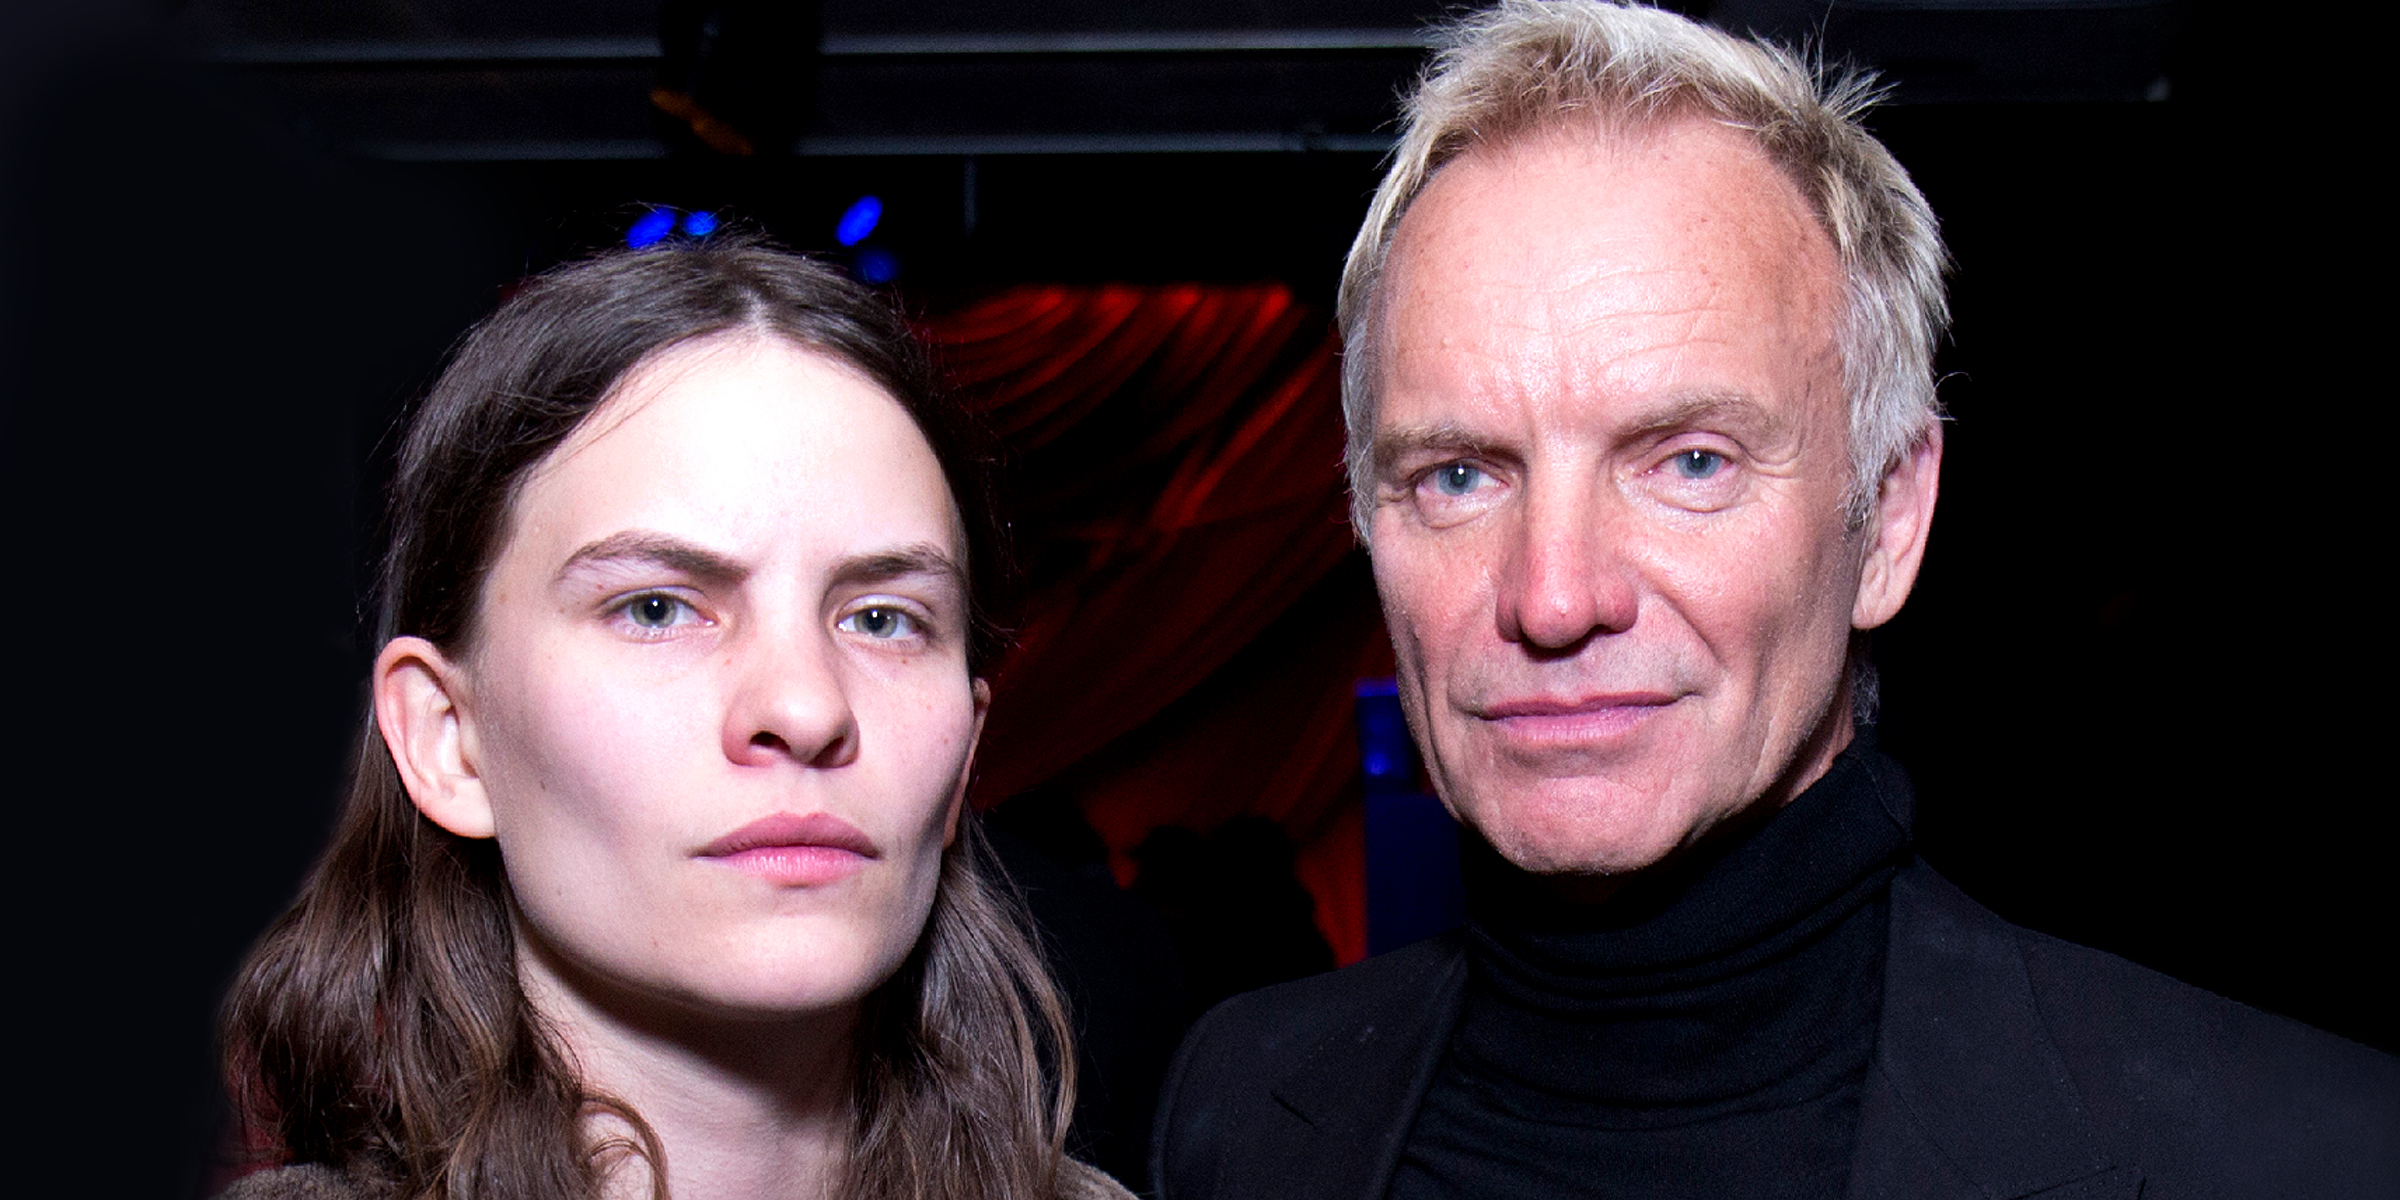 Eliot Sumner and Sting in 2018 | Source: Getty Images